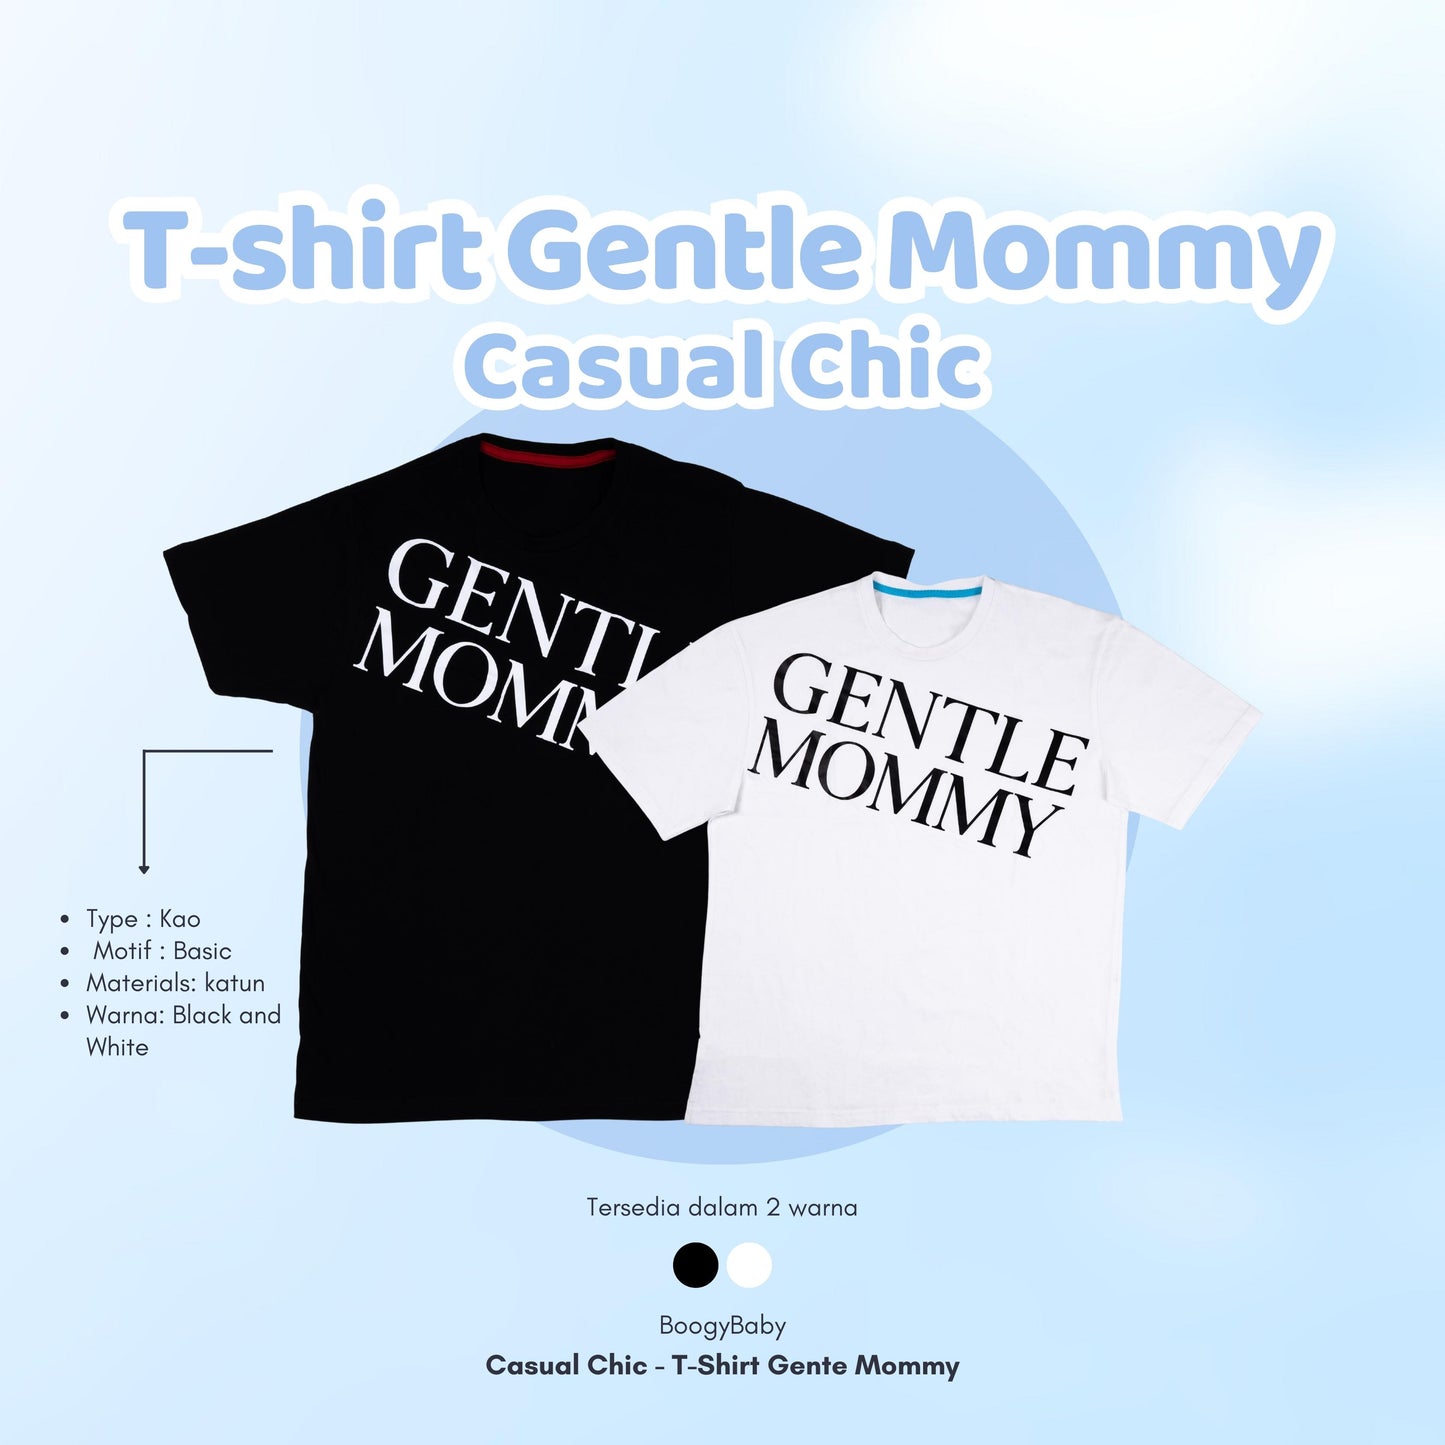 T Shirt Gentle Mommy (Casual Chic)